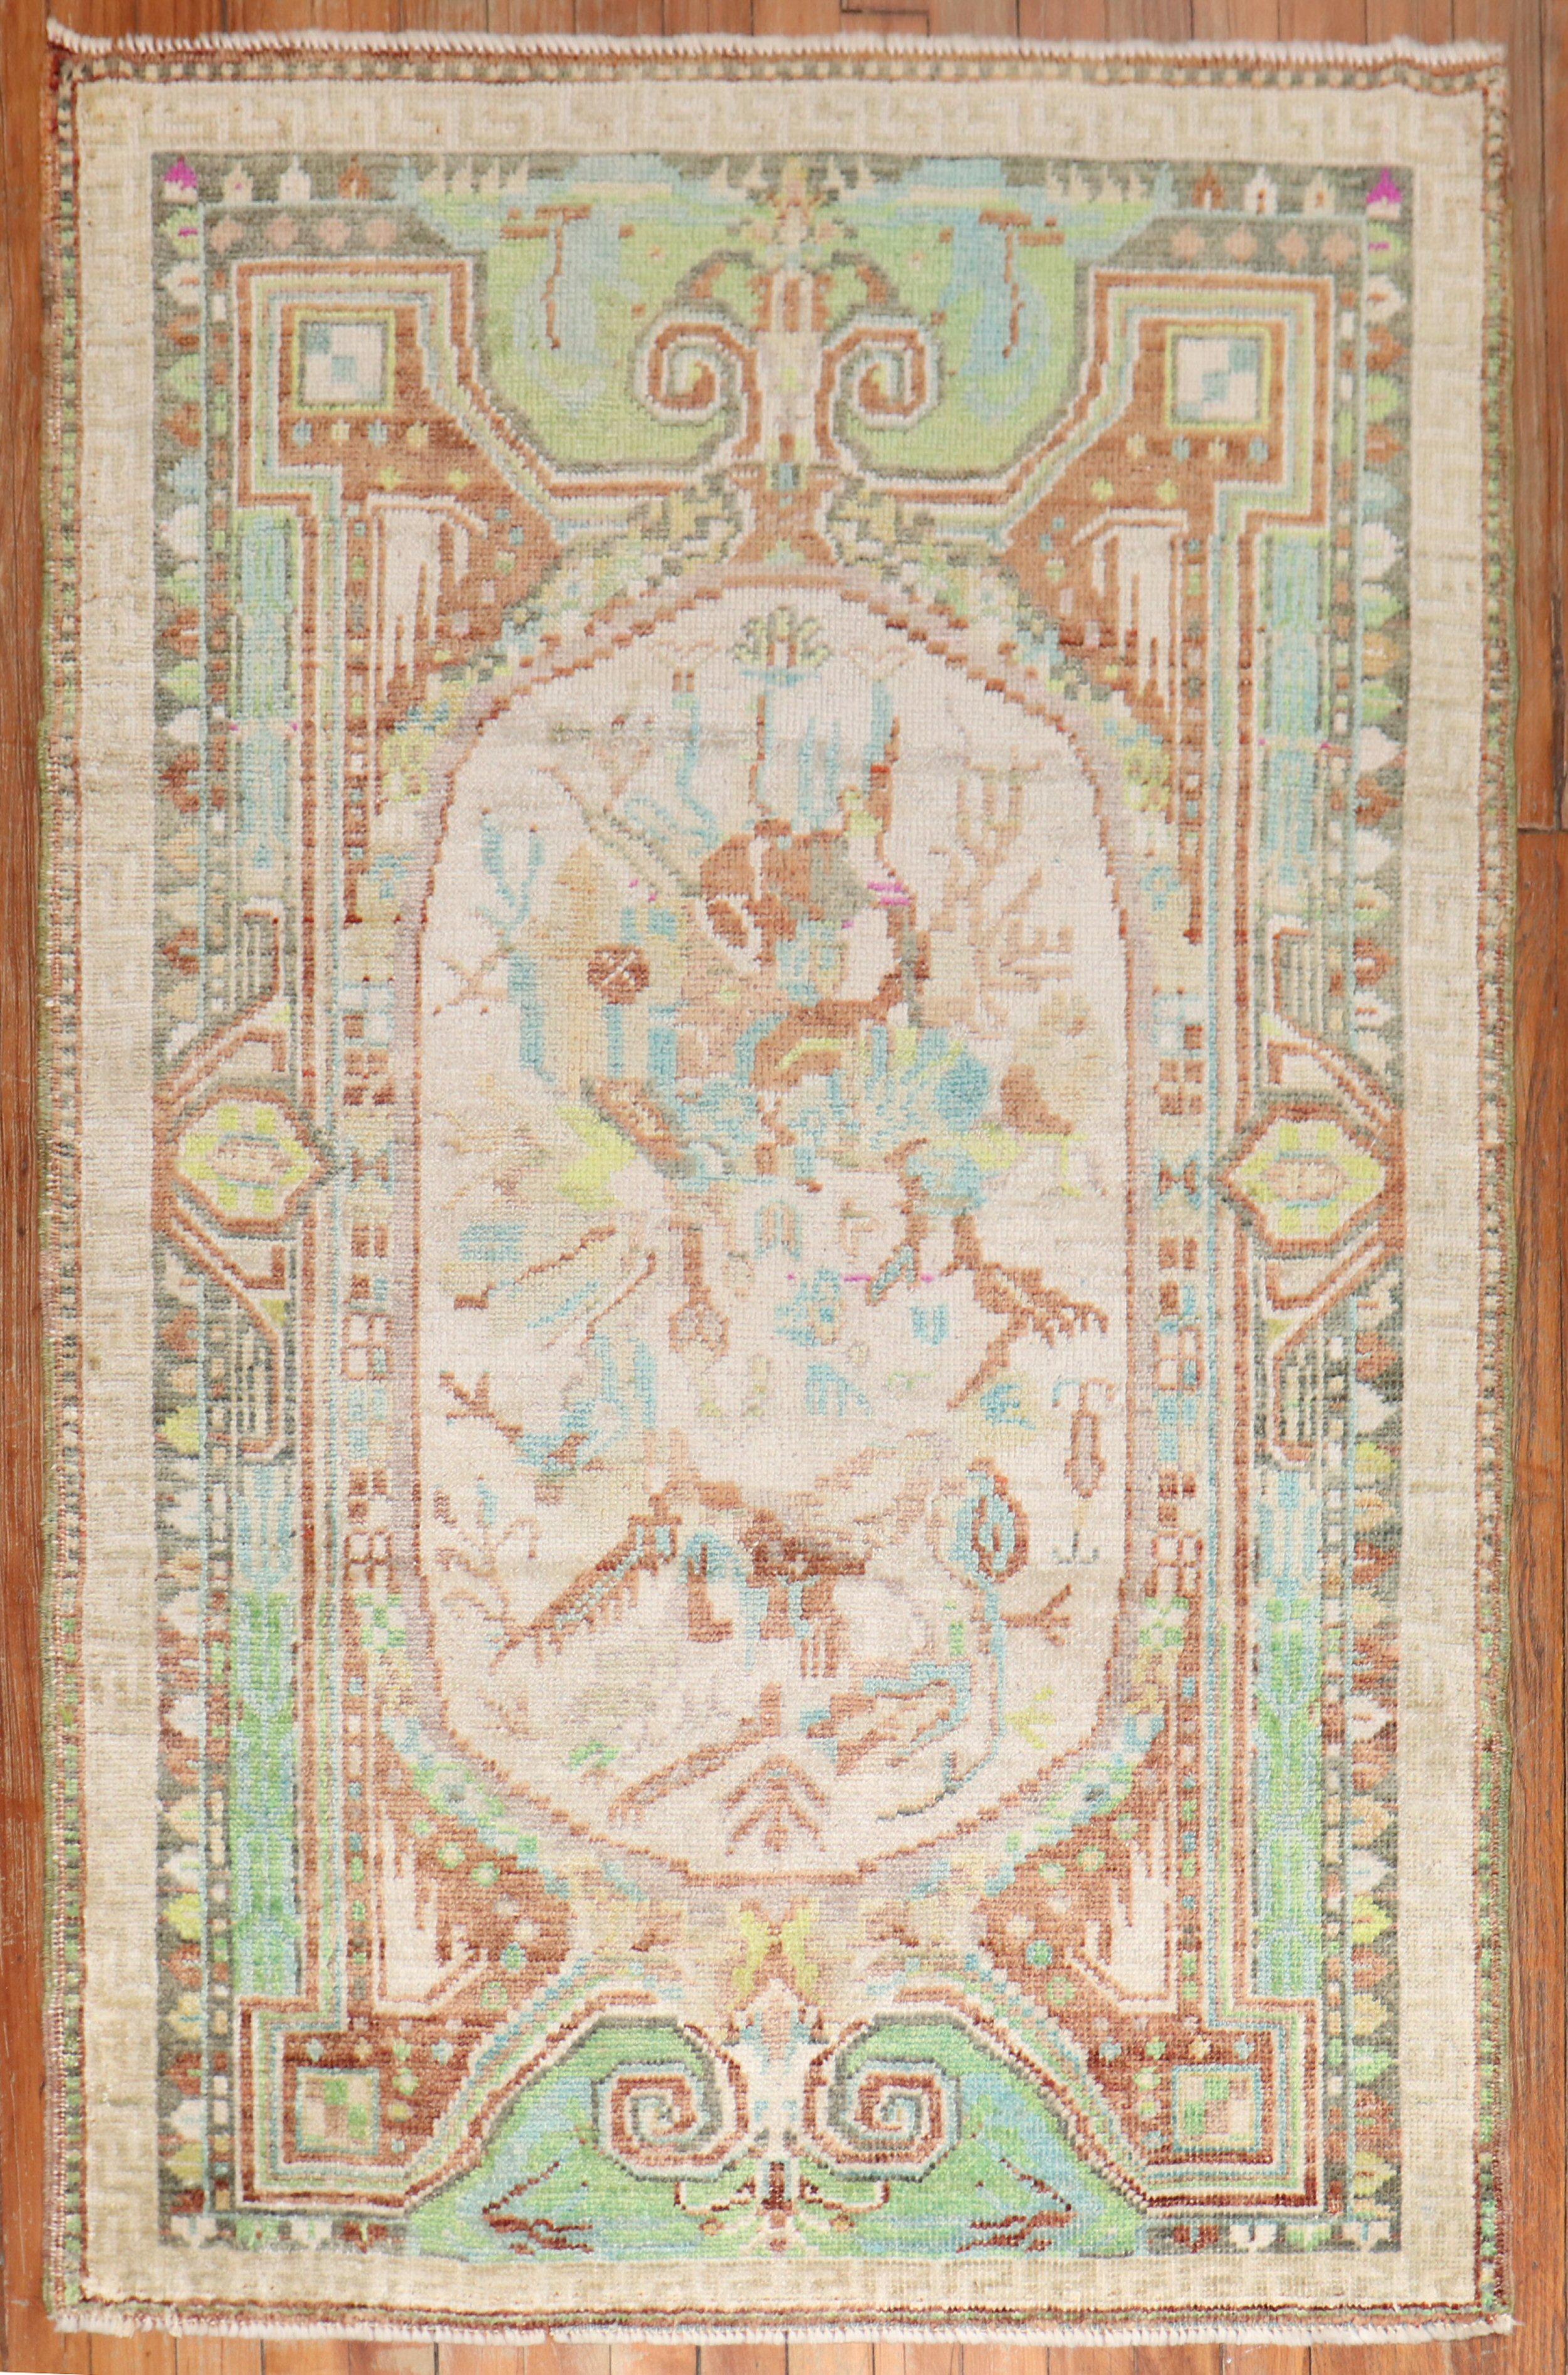 Delightful scatter size Turkish Ghiordes rug from the 2nd quarter of the 20th century

Measures: 3'2'' x 4'9''.